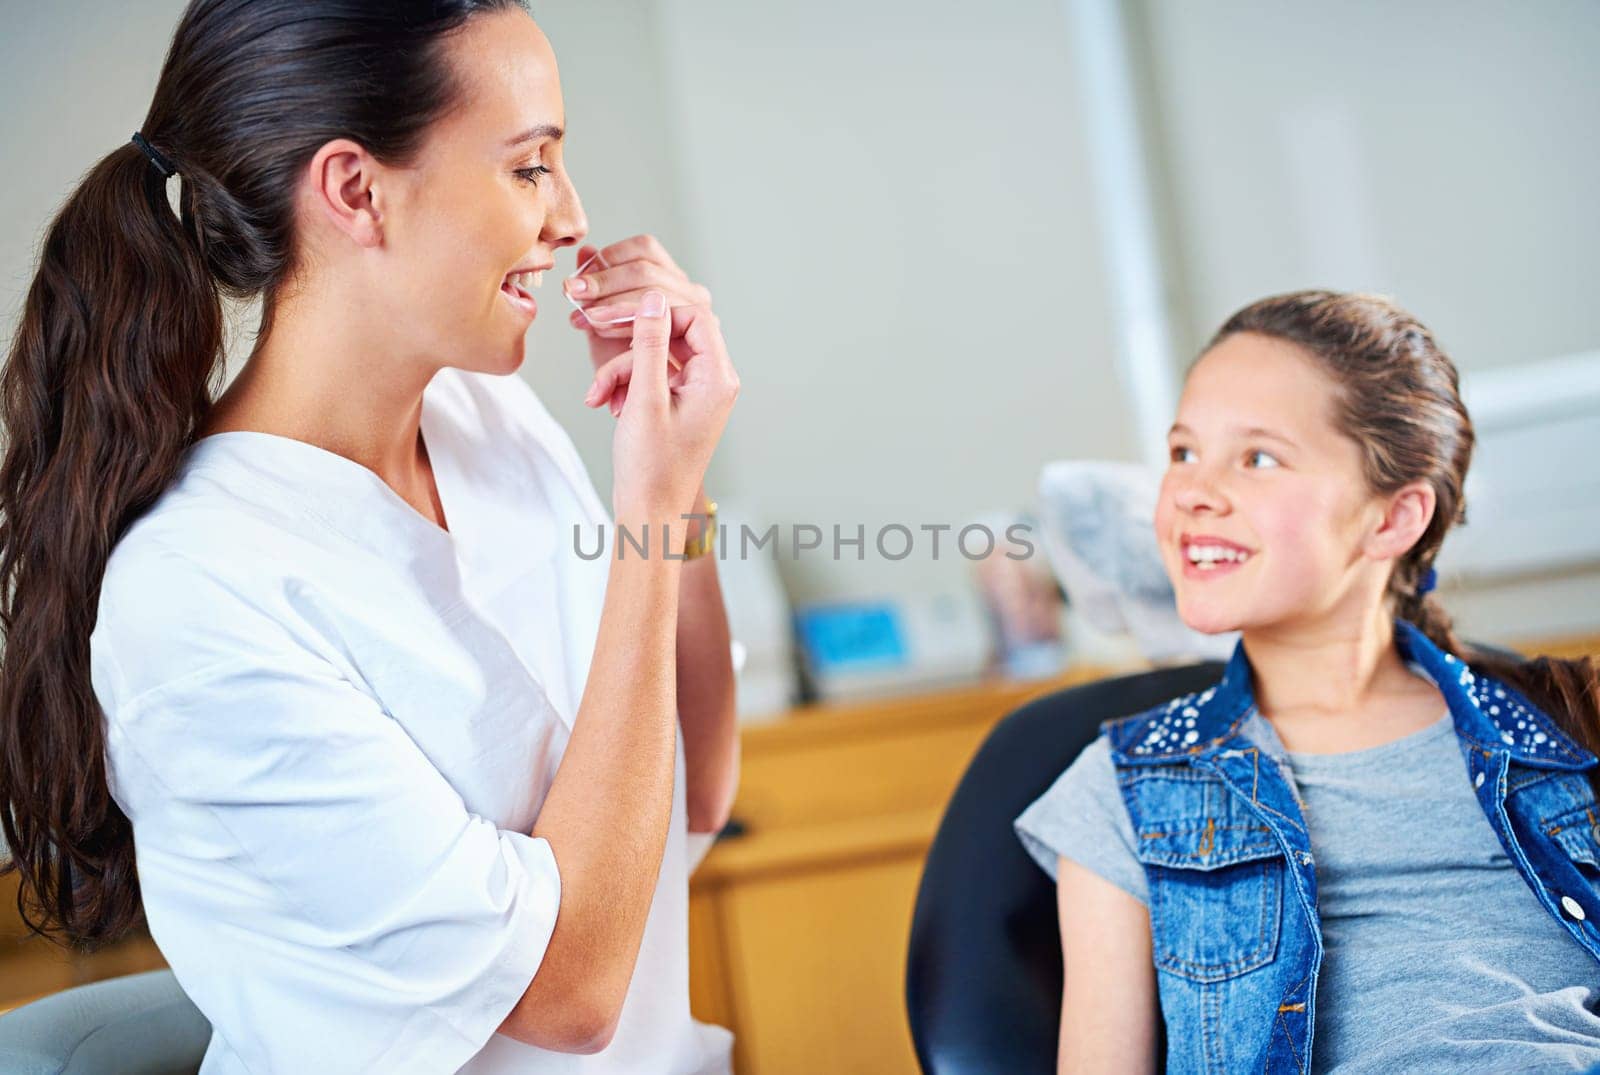 Technique is everything with flossing. a female dentist and child in a dentist office. by YuriArcurs